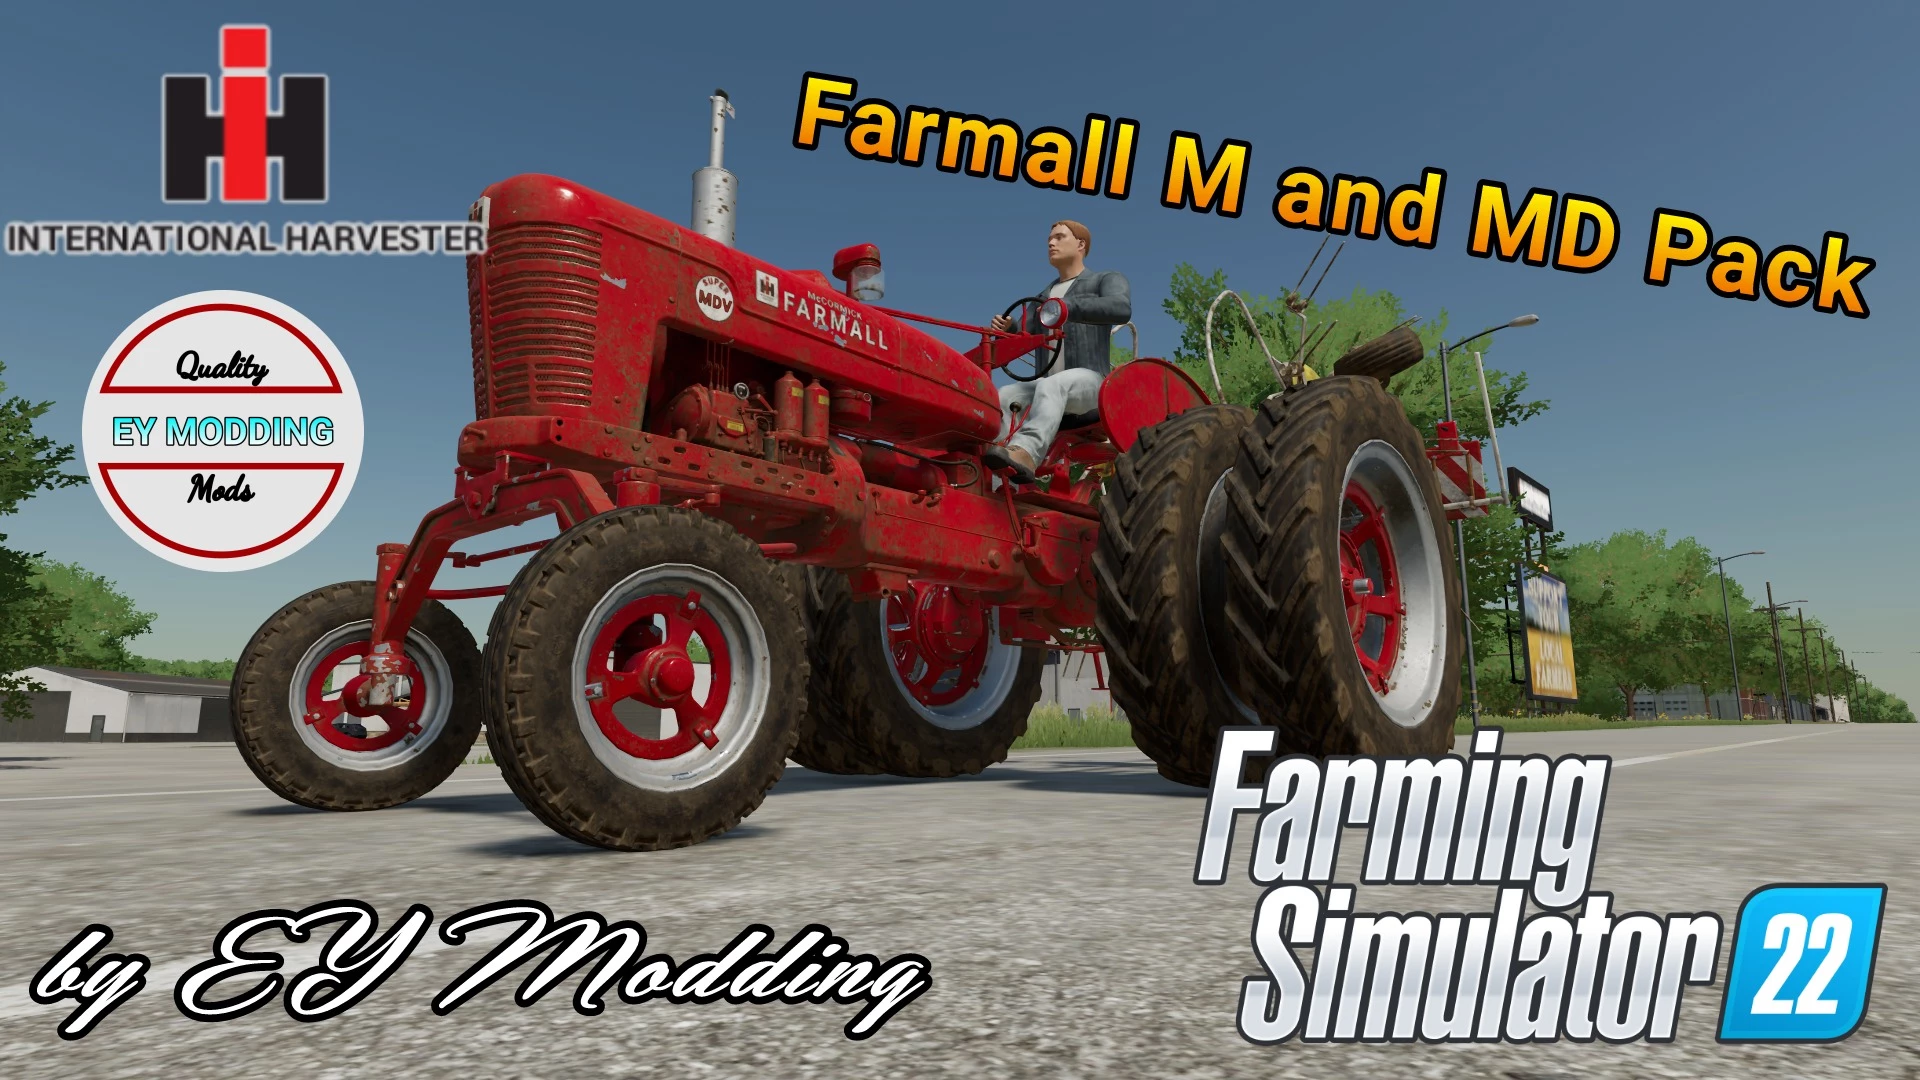 Farmall M and MD Series